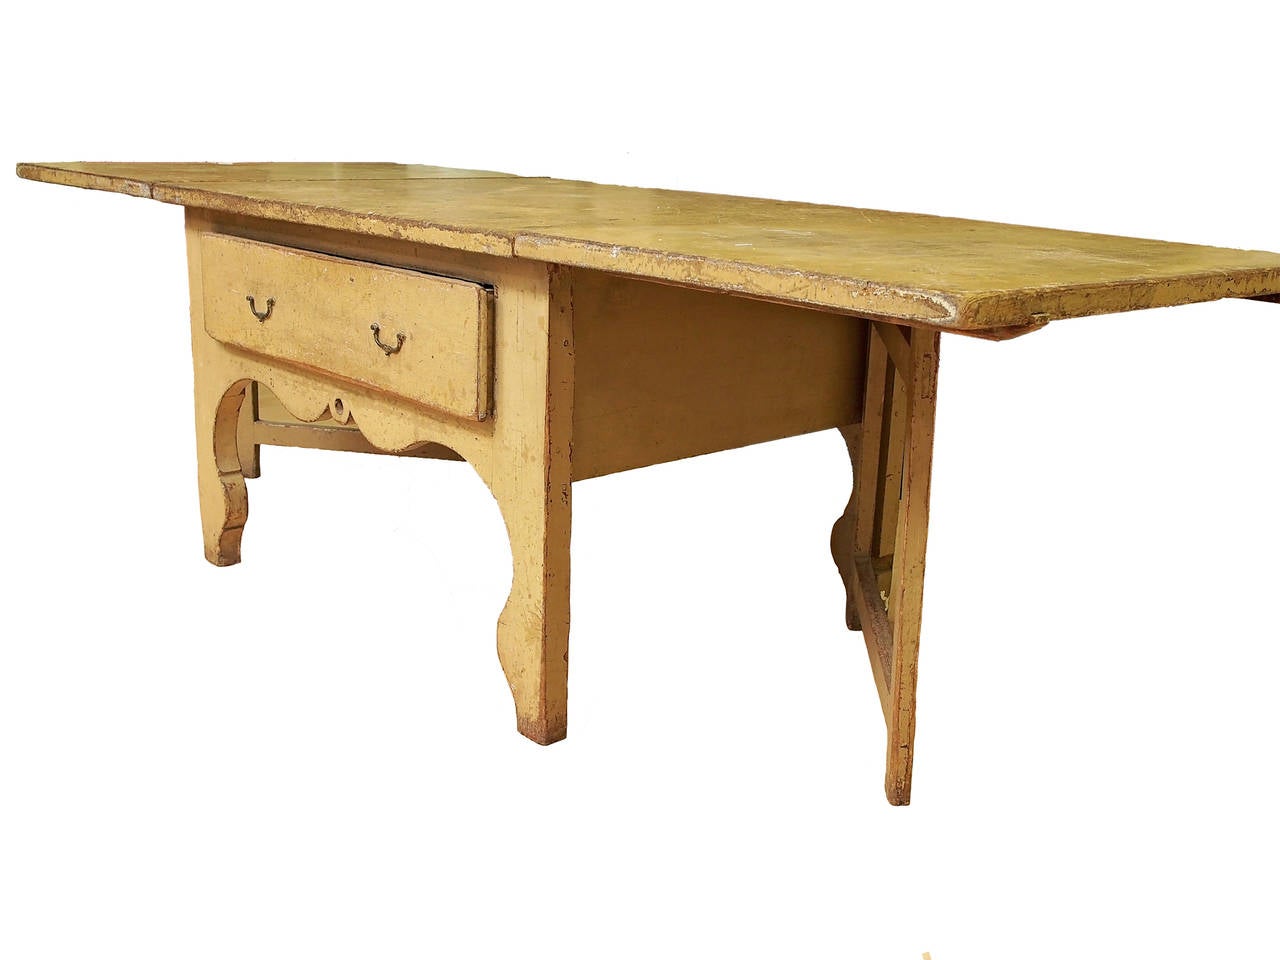 Beautiful oversized 18th century rustic Swedish country wooden farmhouse table. Original paint with aged ochre patina. Two drop-leafs with single drawer offers many possibilities for uses.

Dimensions: 29 3/4